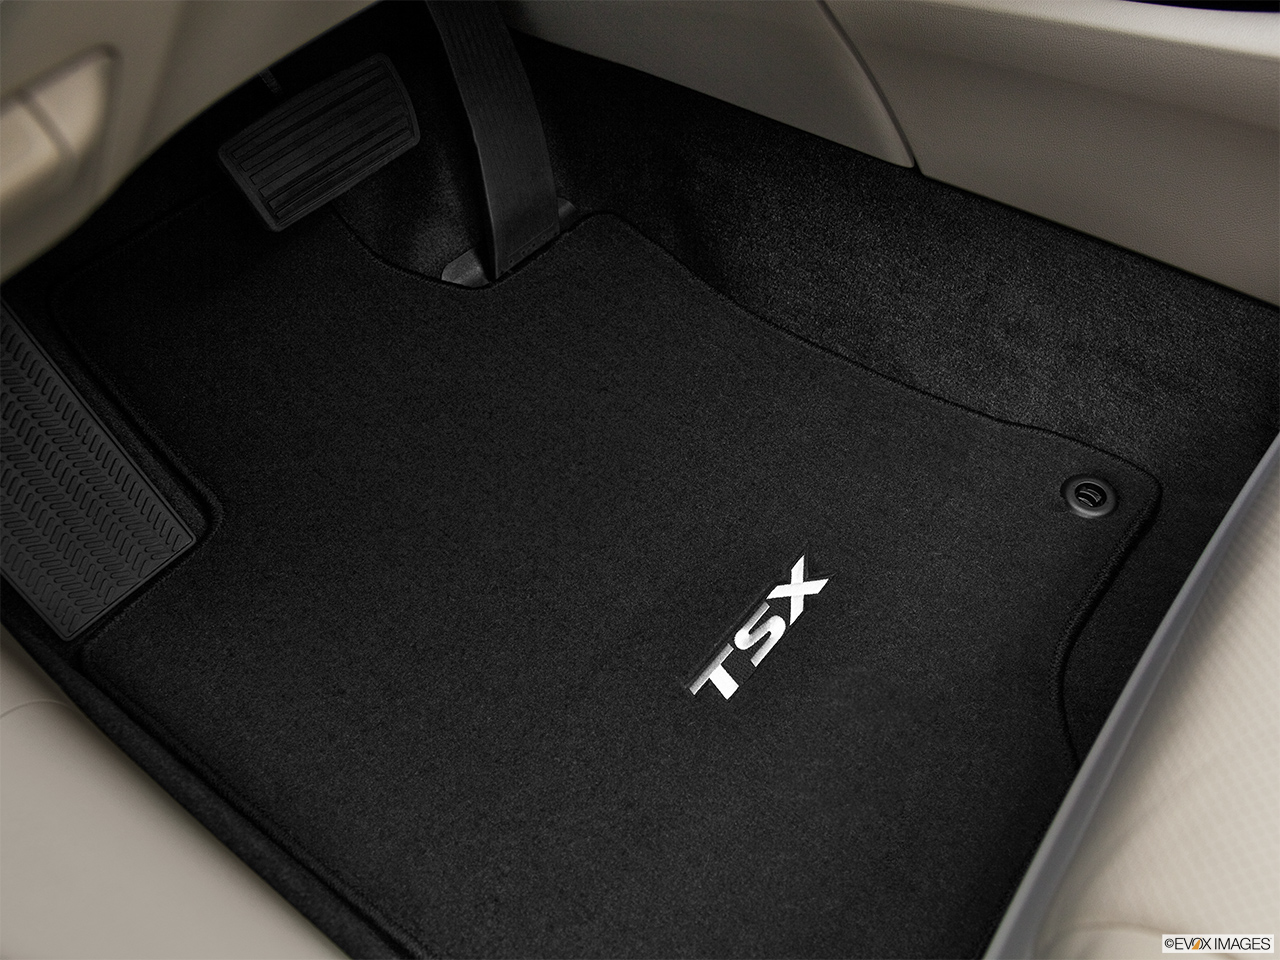 2012 Acura TSX Sport Wagon Driver's floor mat and pedals. Mid-seat level from outside looking in. 